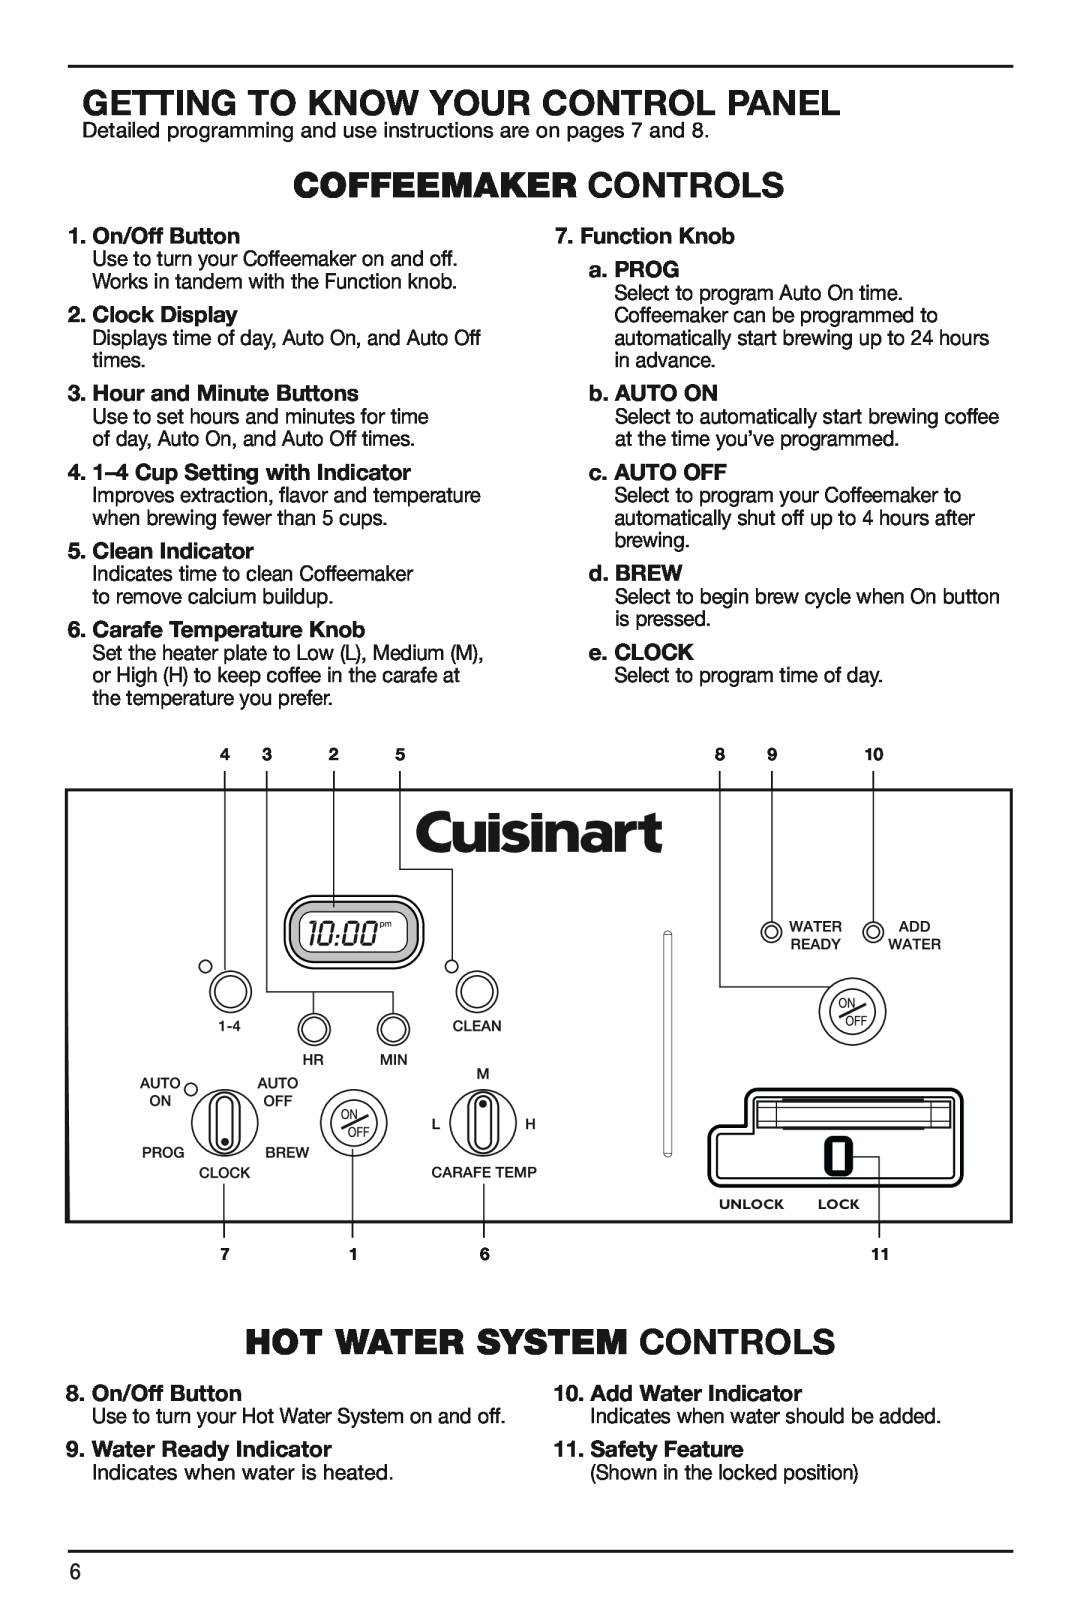 Cuisinart CHW12 manual Getting to know your Control Panel, Coffeemaker Controls, HOT WATER System Controls 